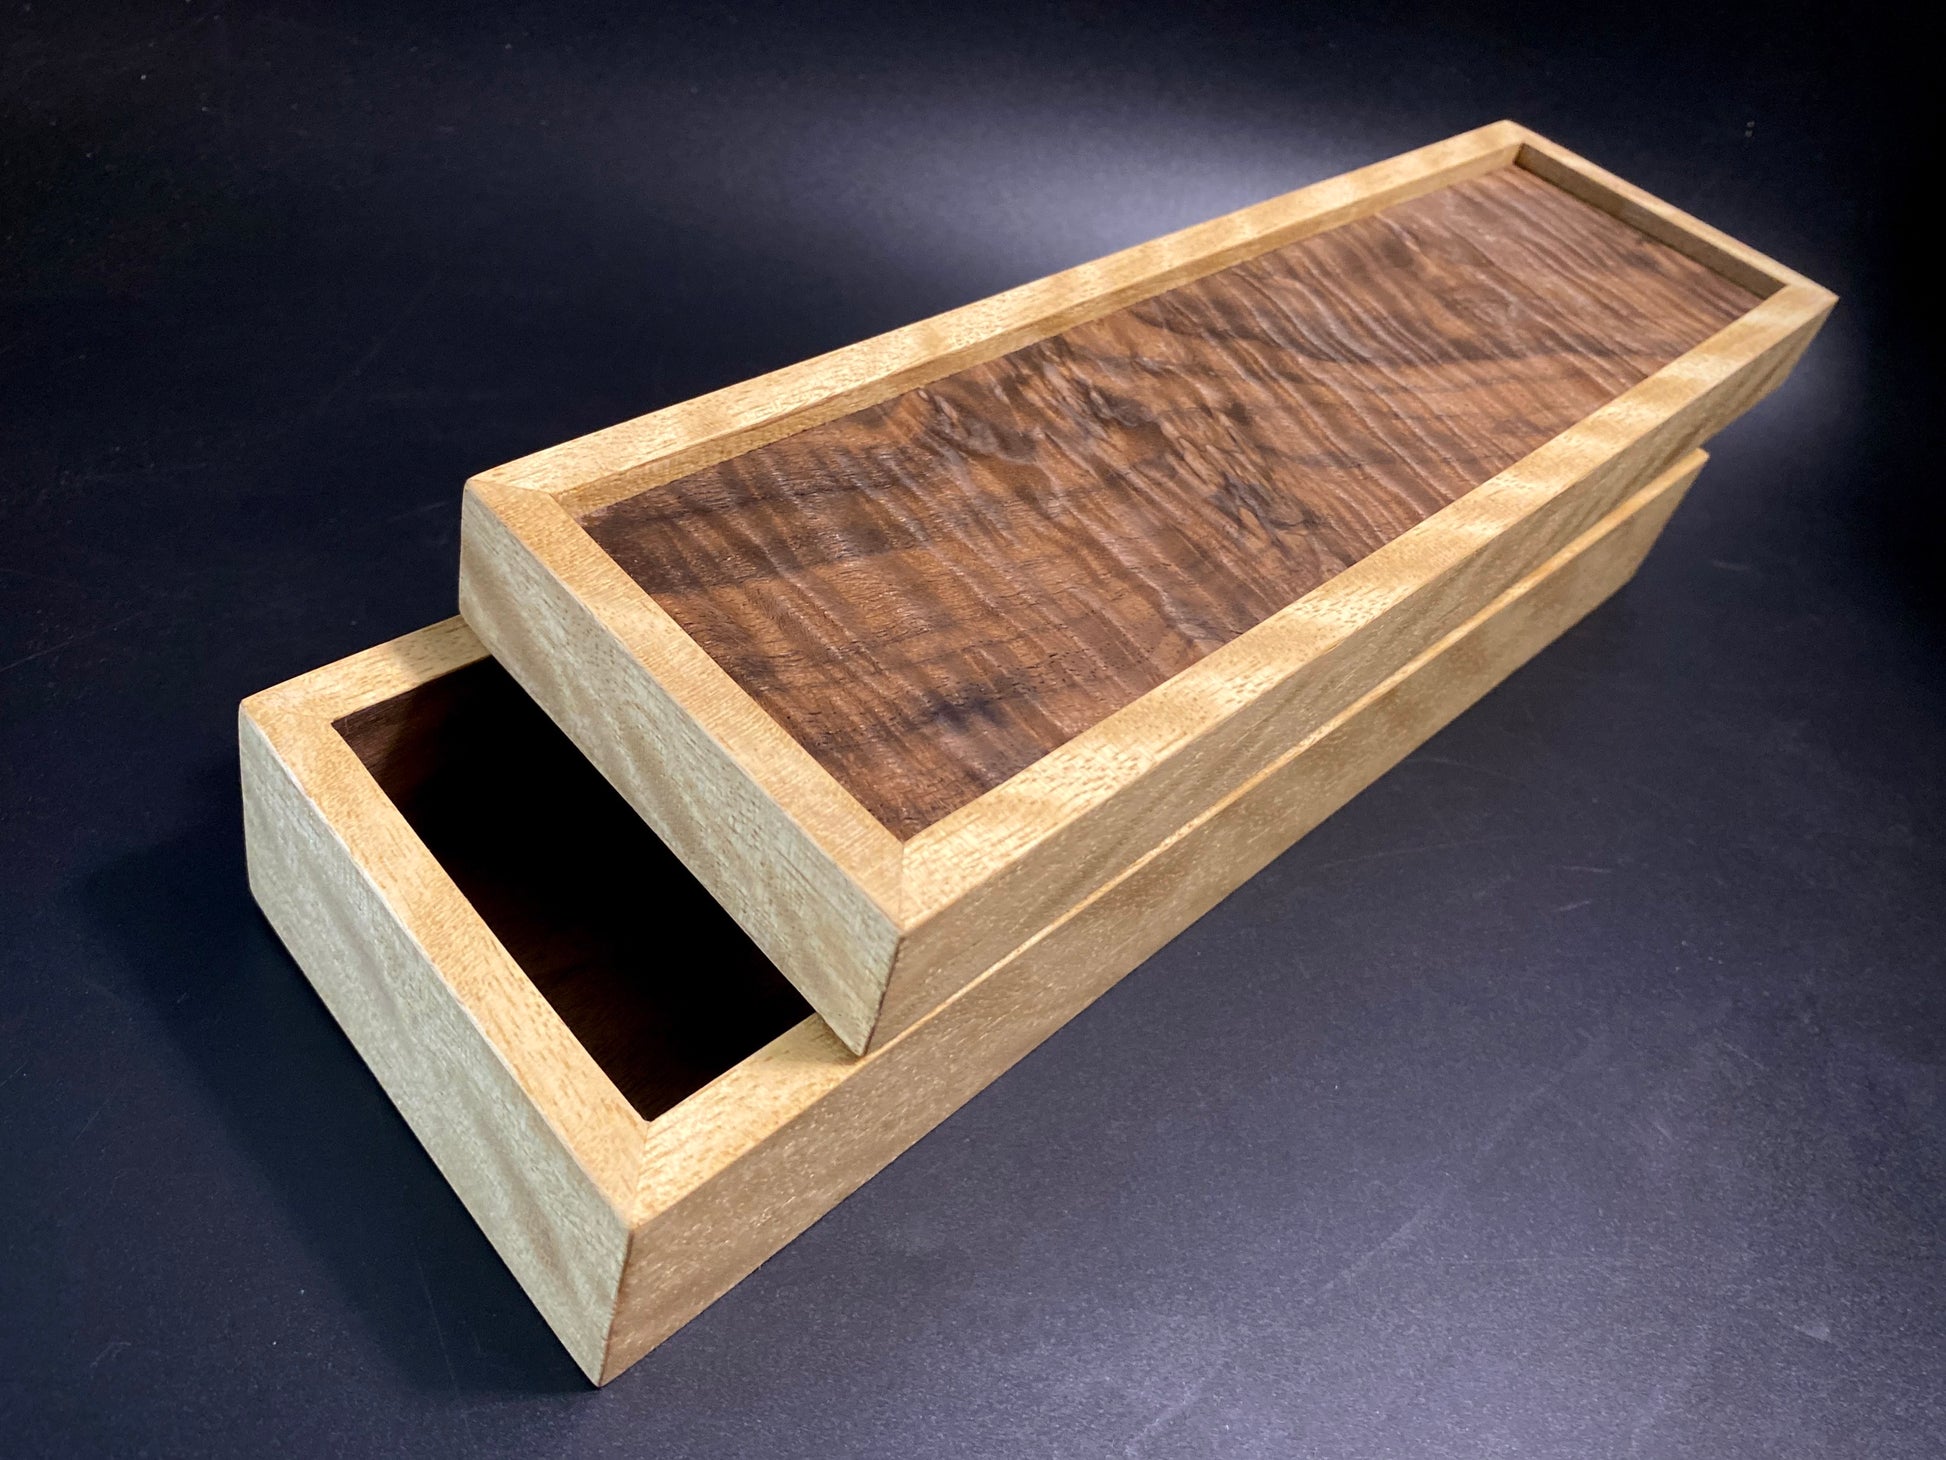 Box 256 mm. for premium knife packing, made of precious woods. #BOX_03